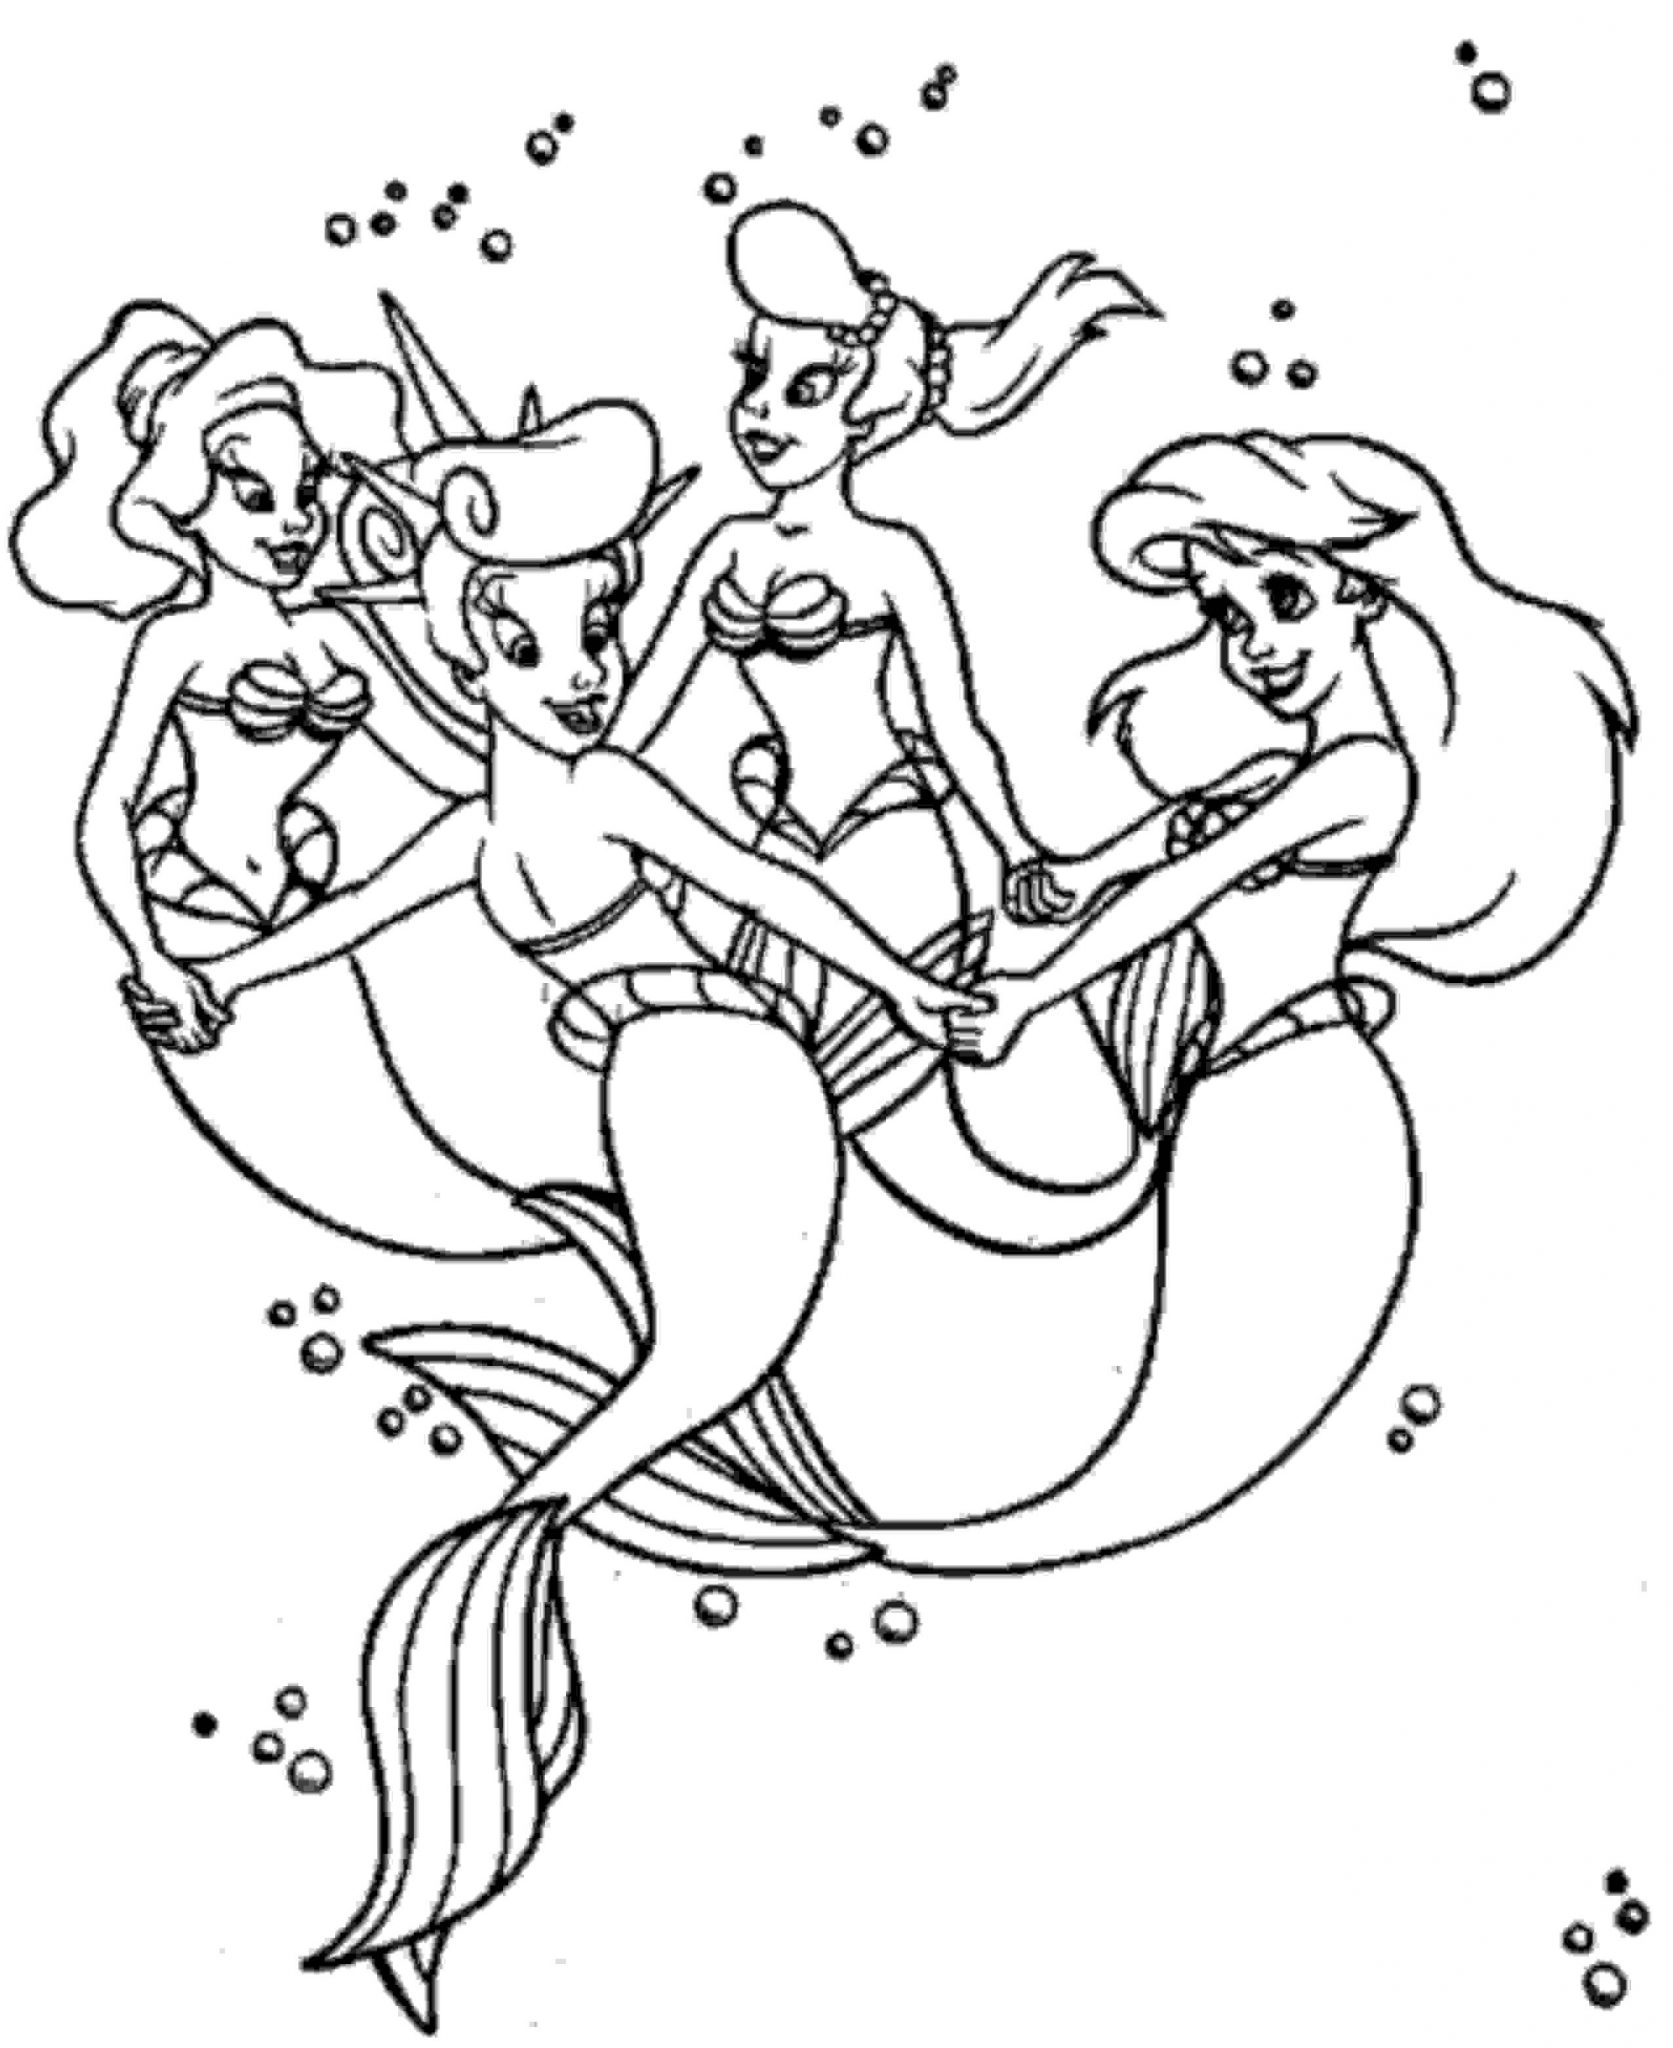 Print & Download - Find the Suitable Little Mermaid Coloring Pages for the Kids